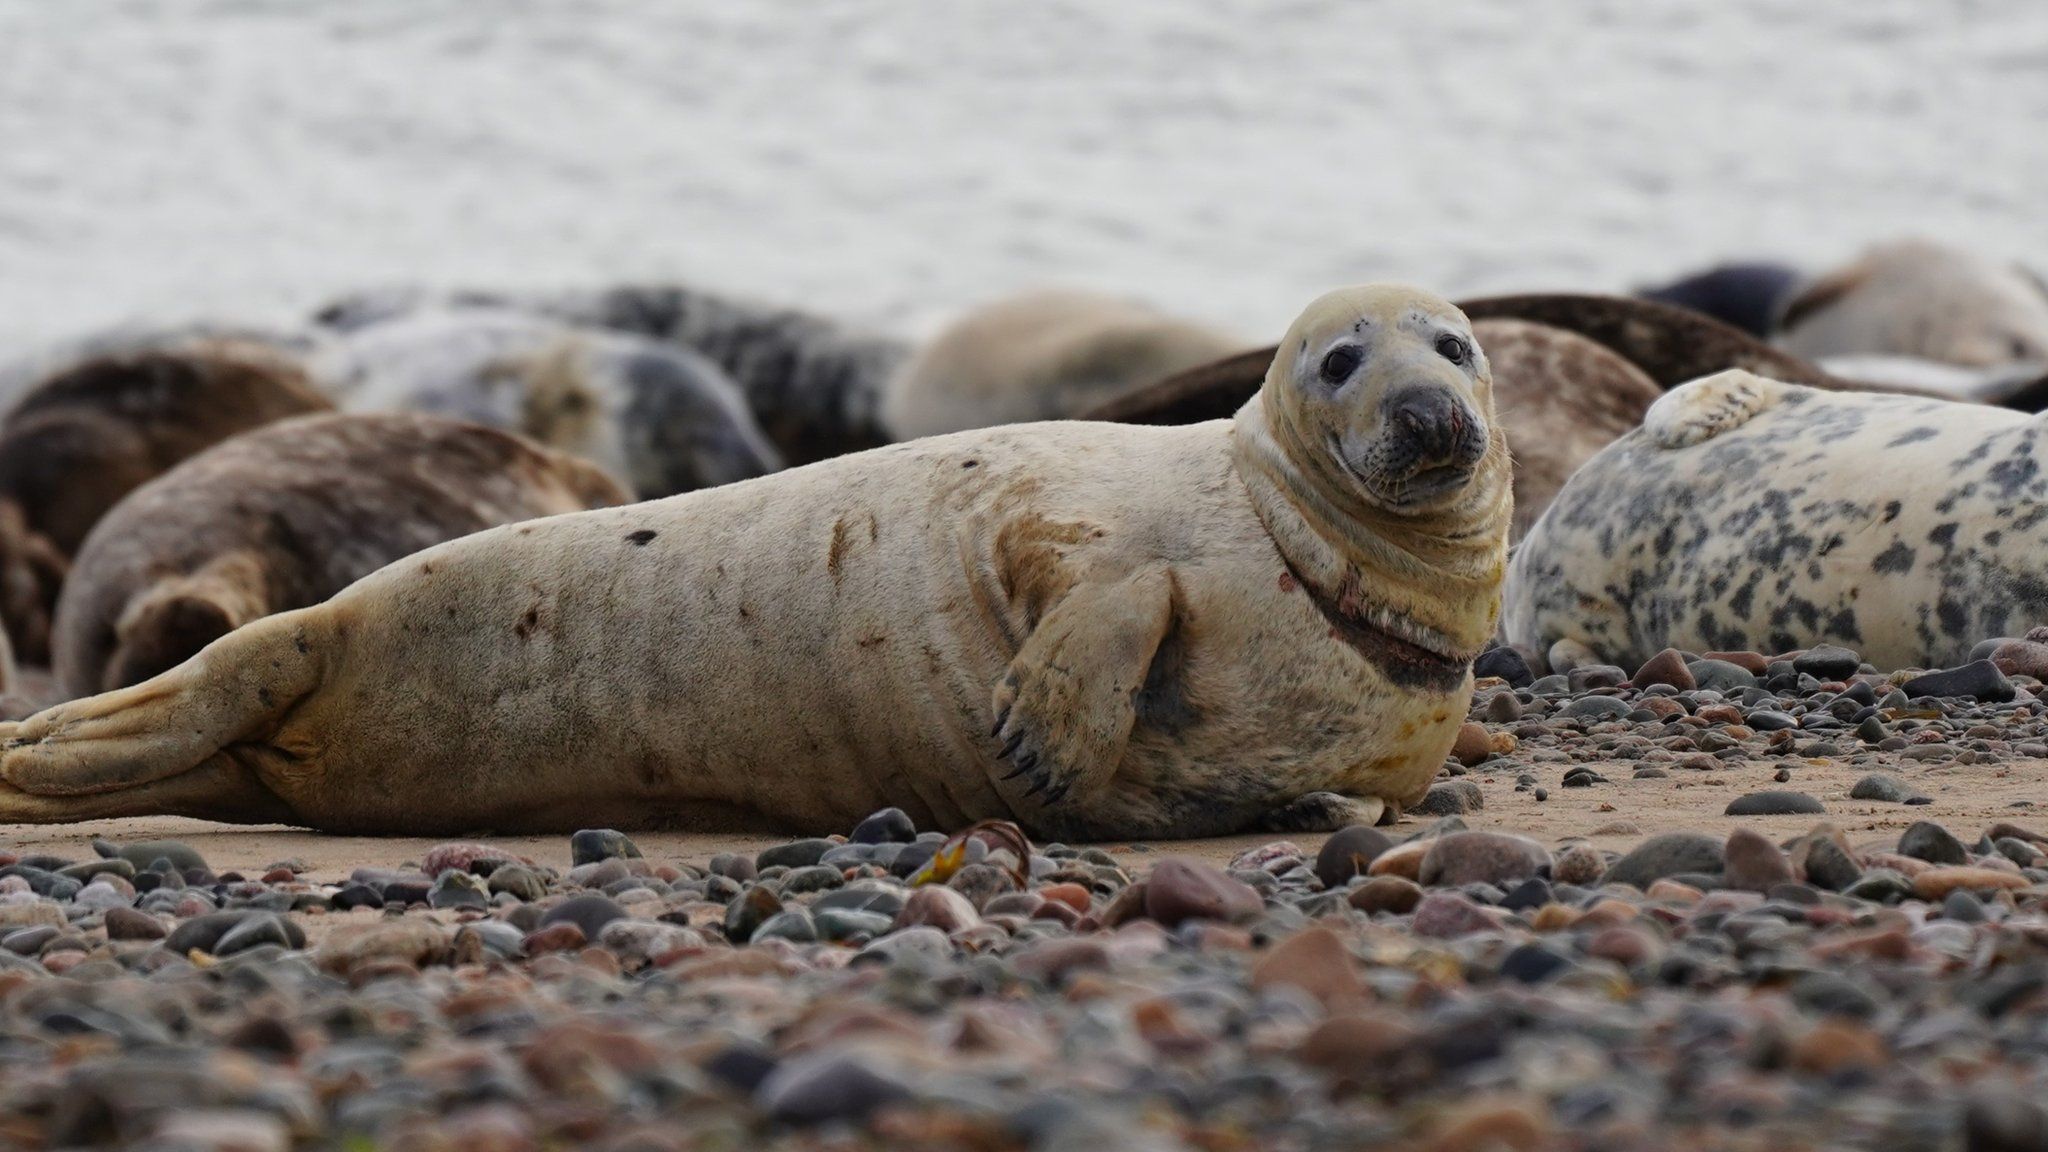 Seal at the Walney reserve with rope tangled around its neck